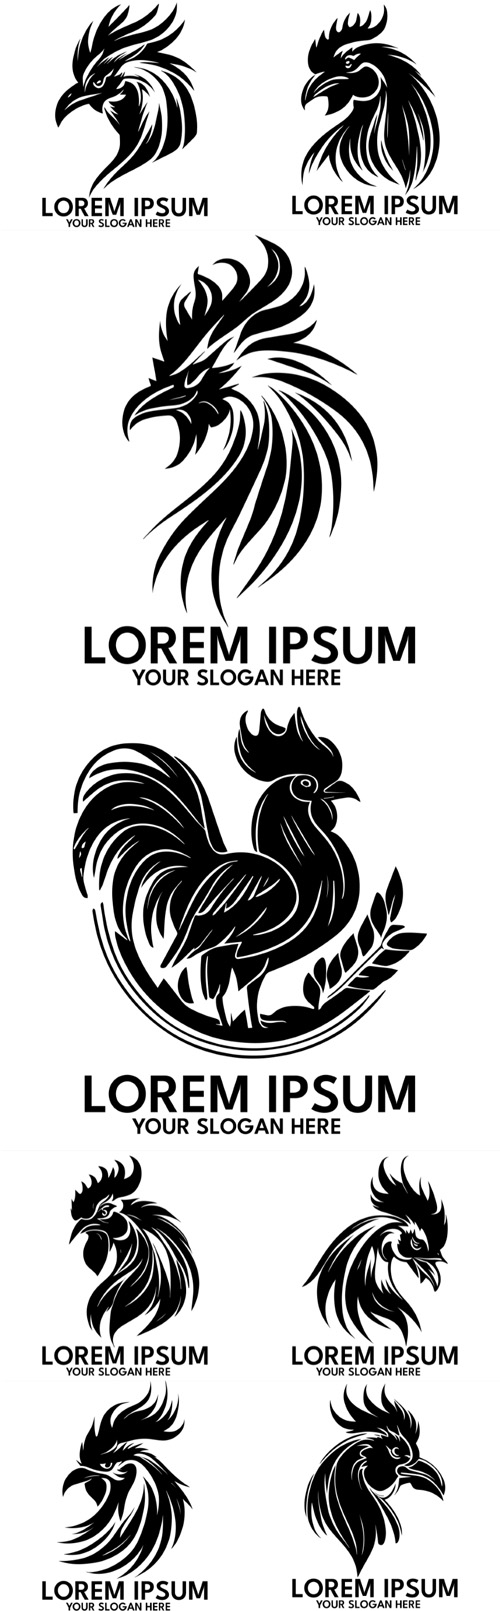 Rooster silhouette logo style vector illustration 